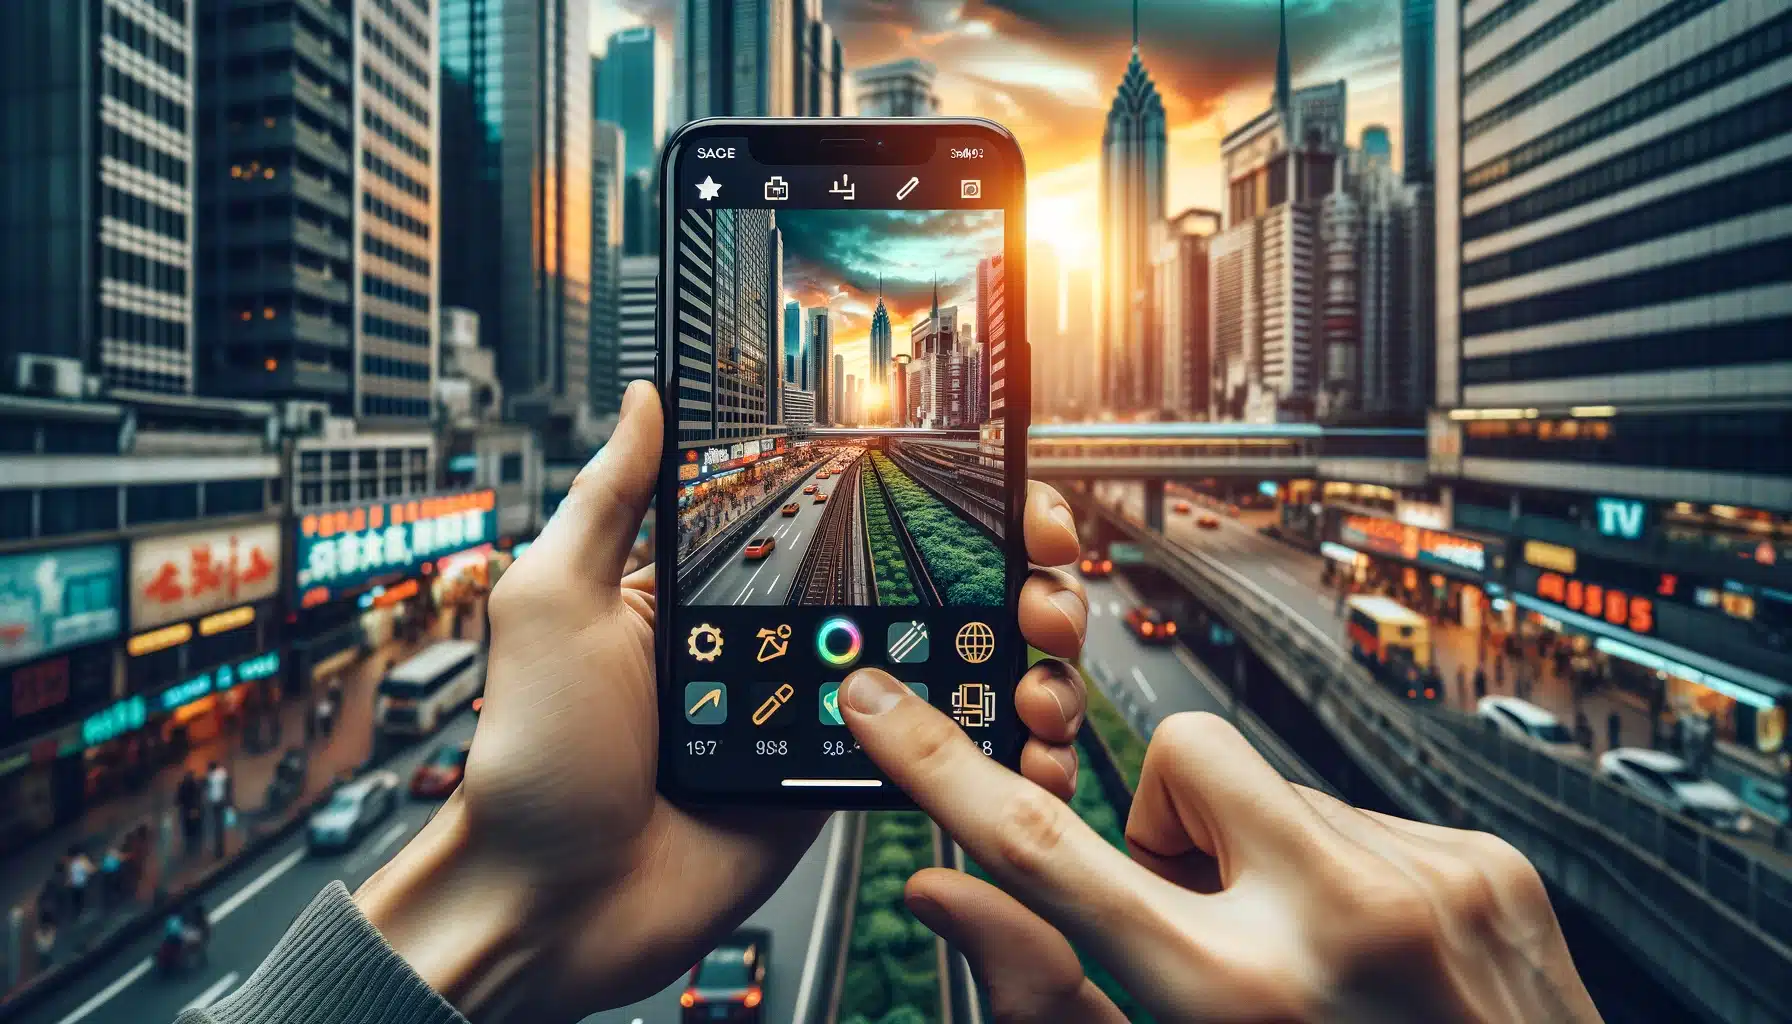 Person in a city using a smartphone with Best mobile photo editing apps to enhance an urban scene, showcasing the power of mobile editing for photography.